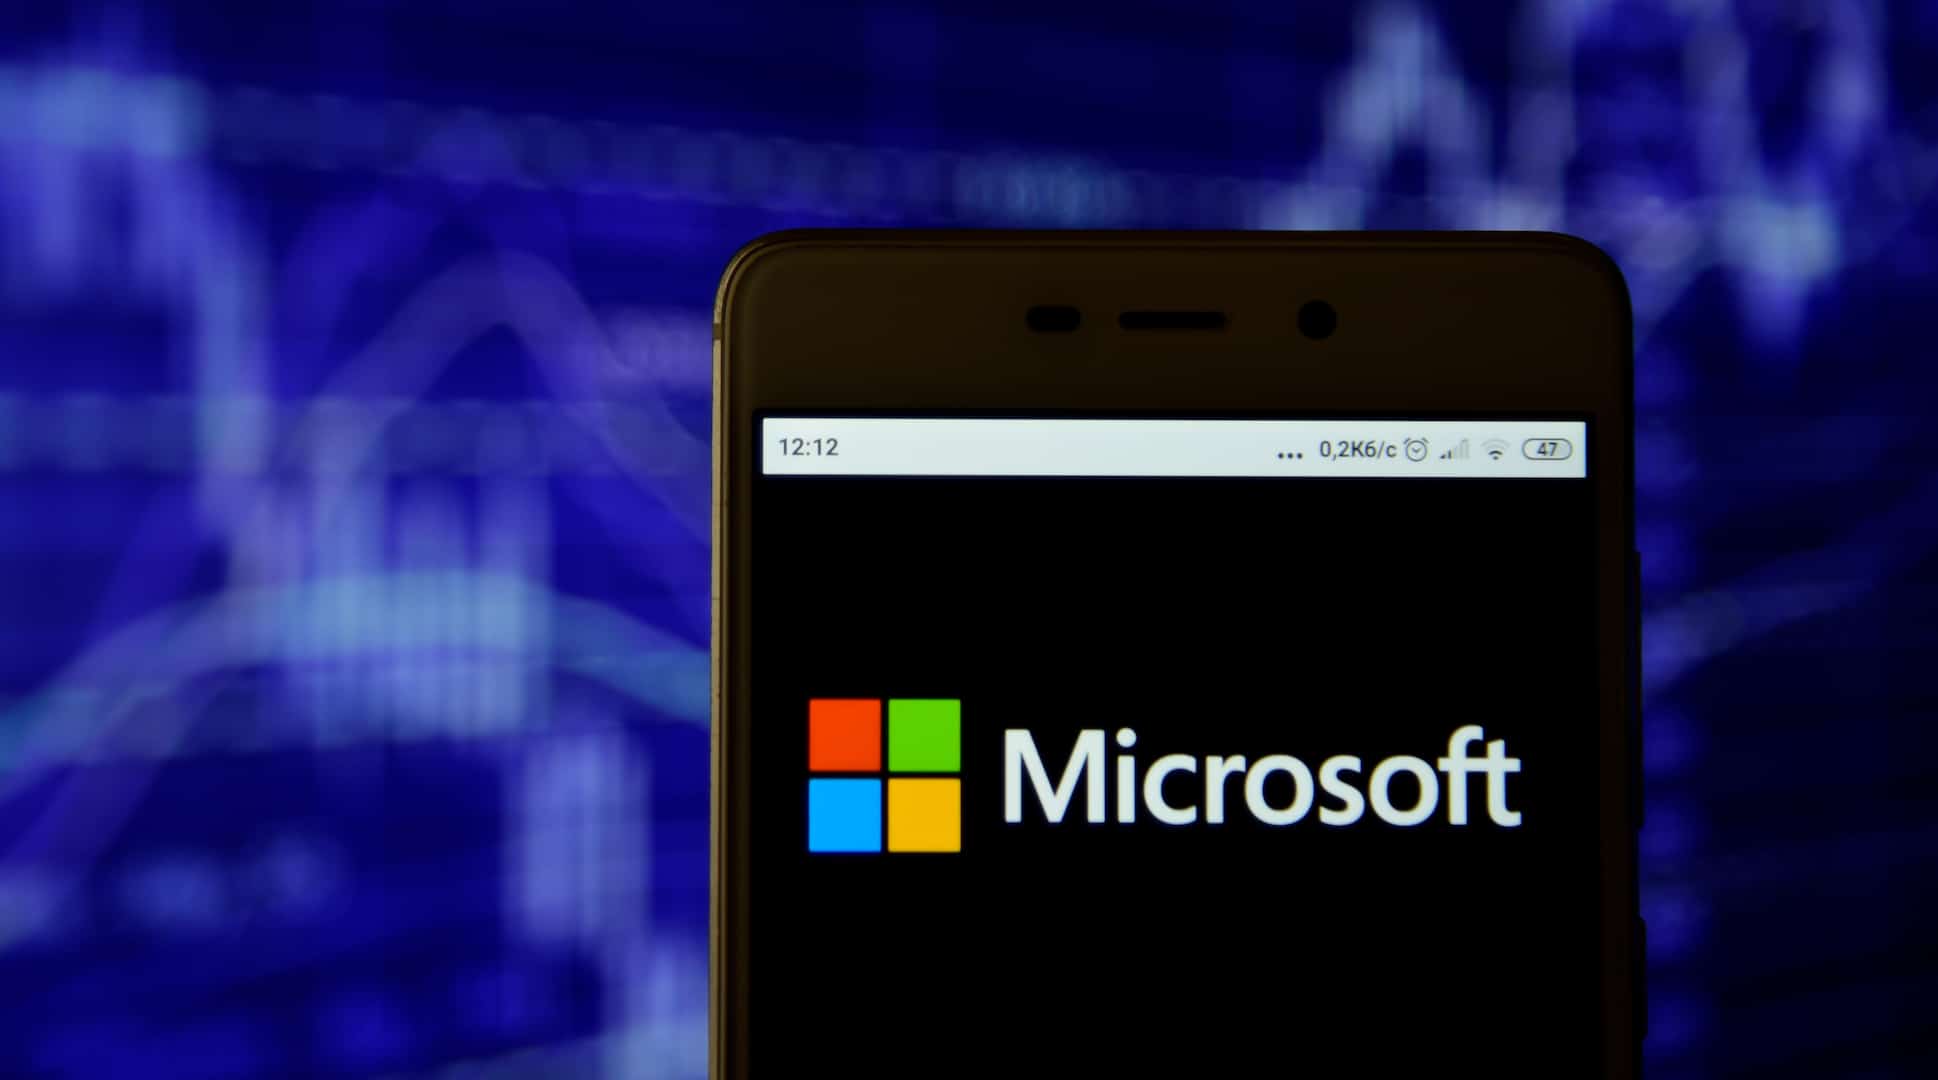 #Microsoft expands enhanced conversions and ad targeting capabilities 